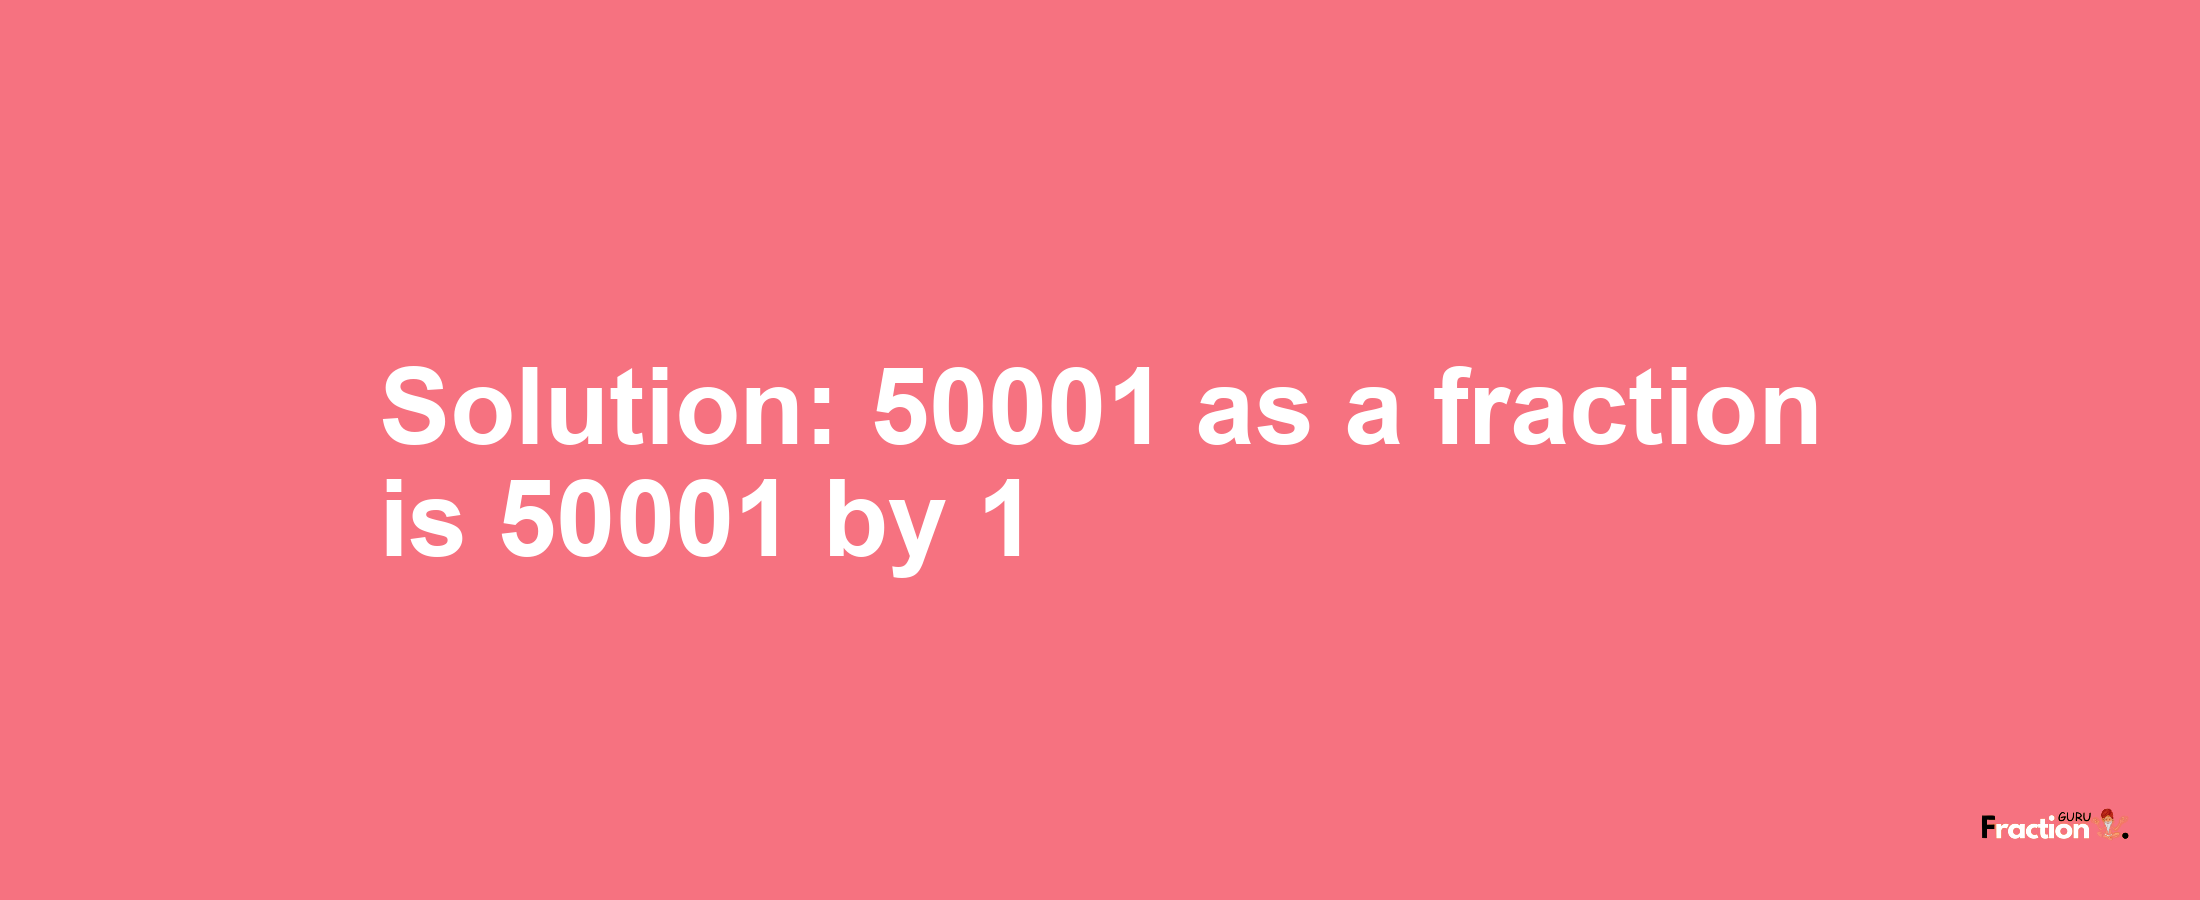 Solution:50001 as a fraction is 50001/1